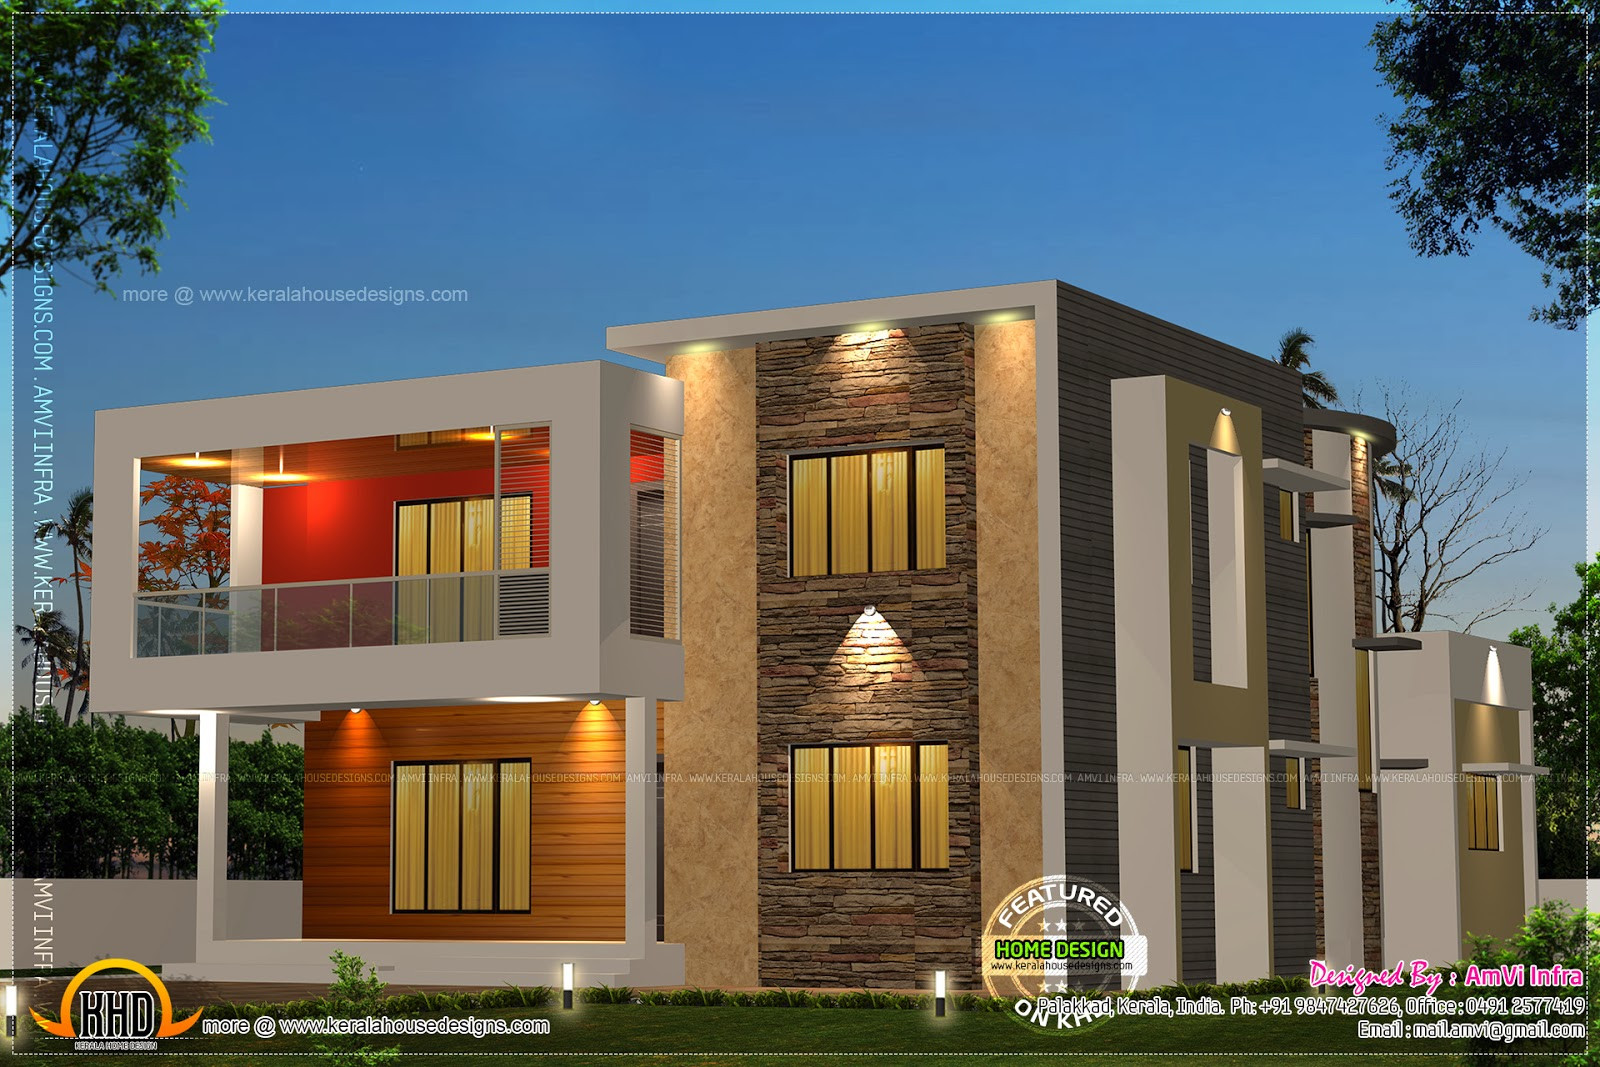 5 Bedroom Modern House Plans
 5 bedroom contemporary house with plan